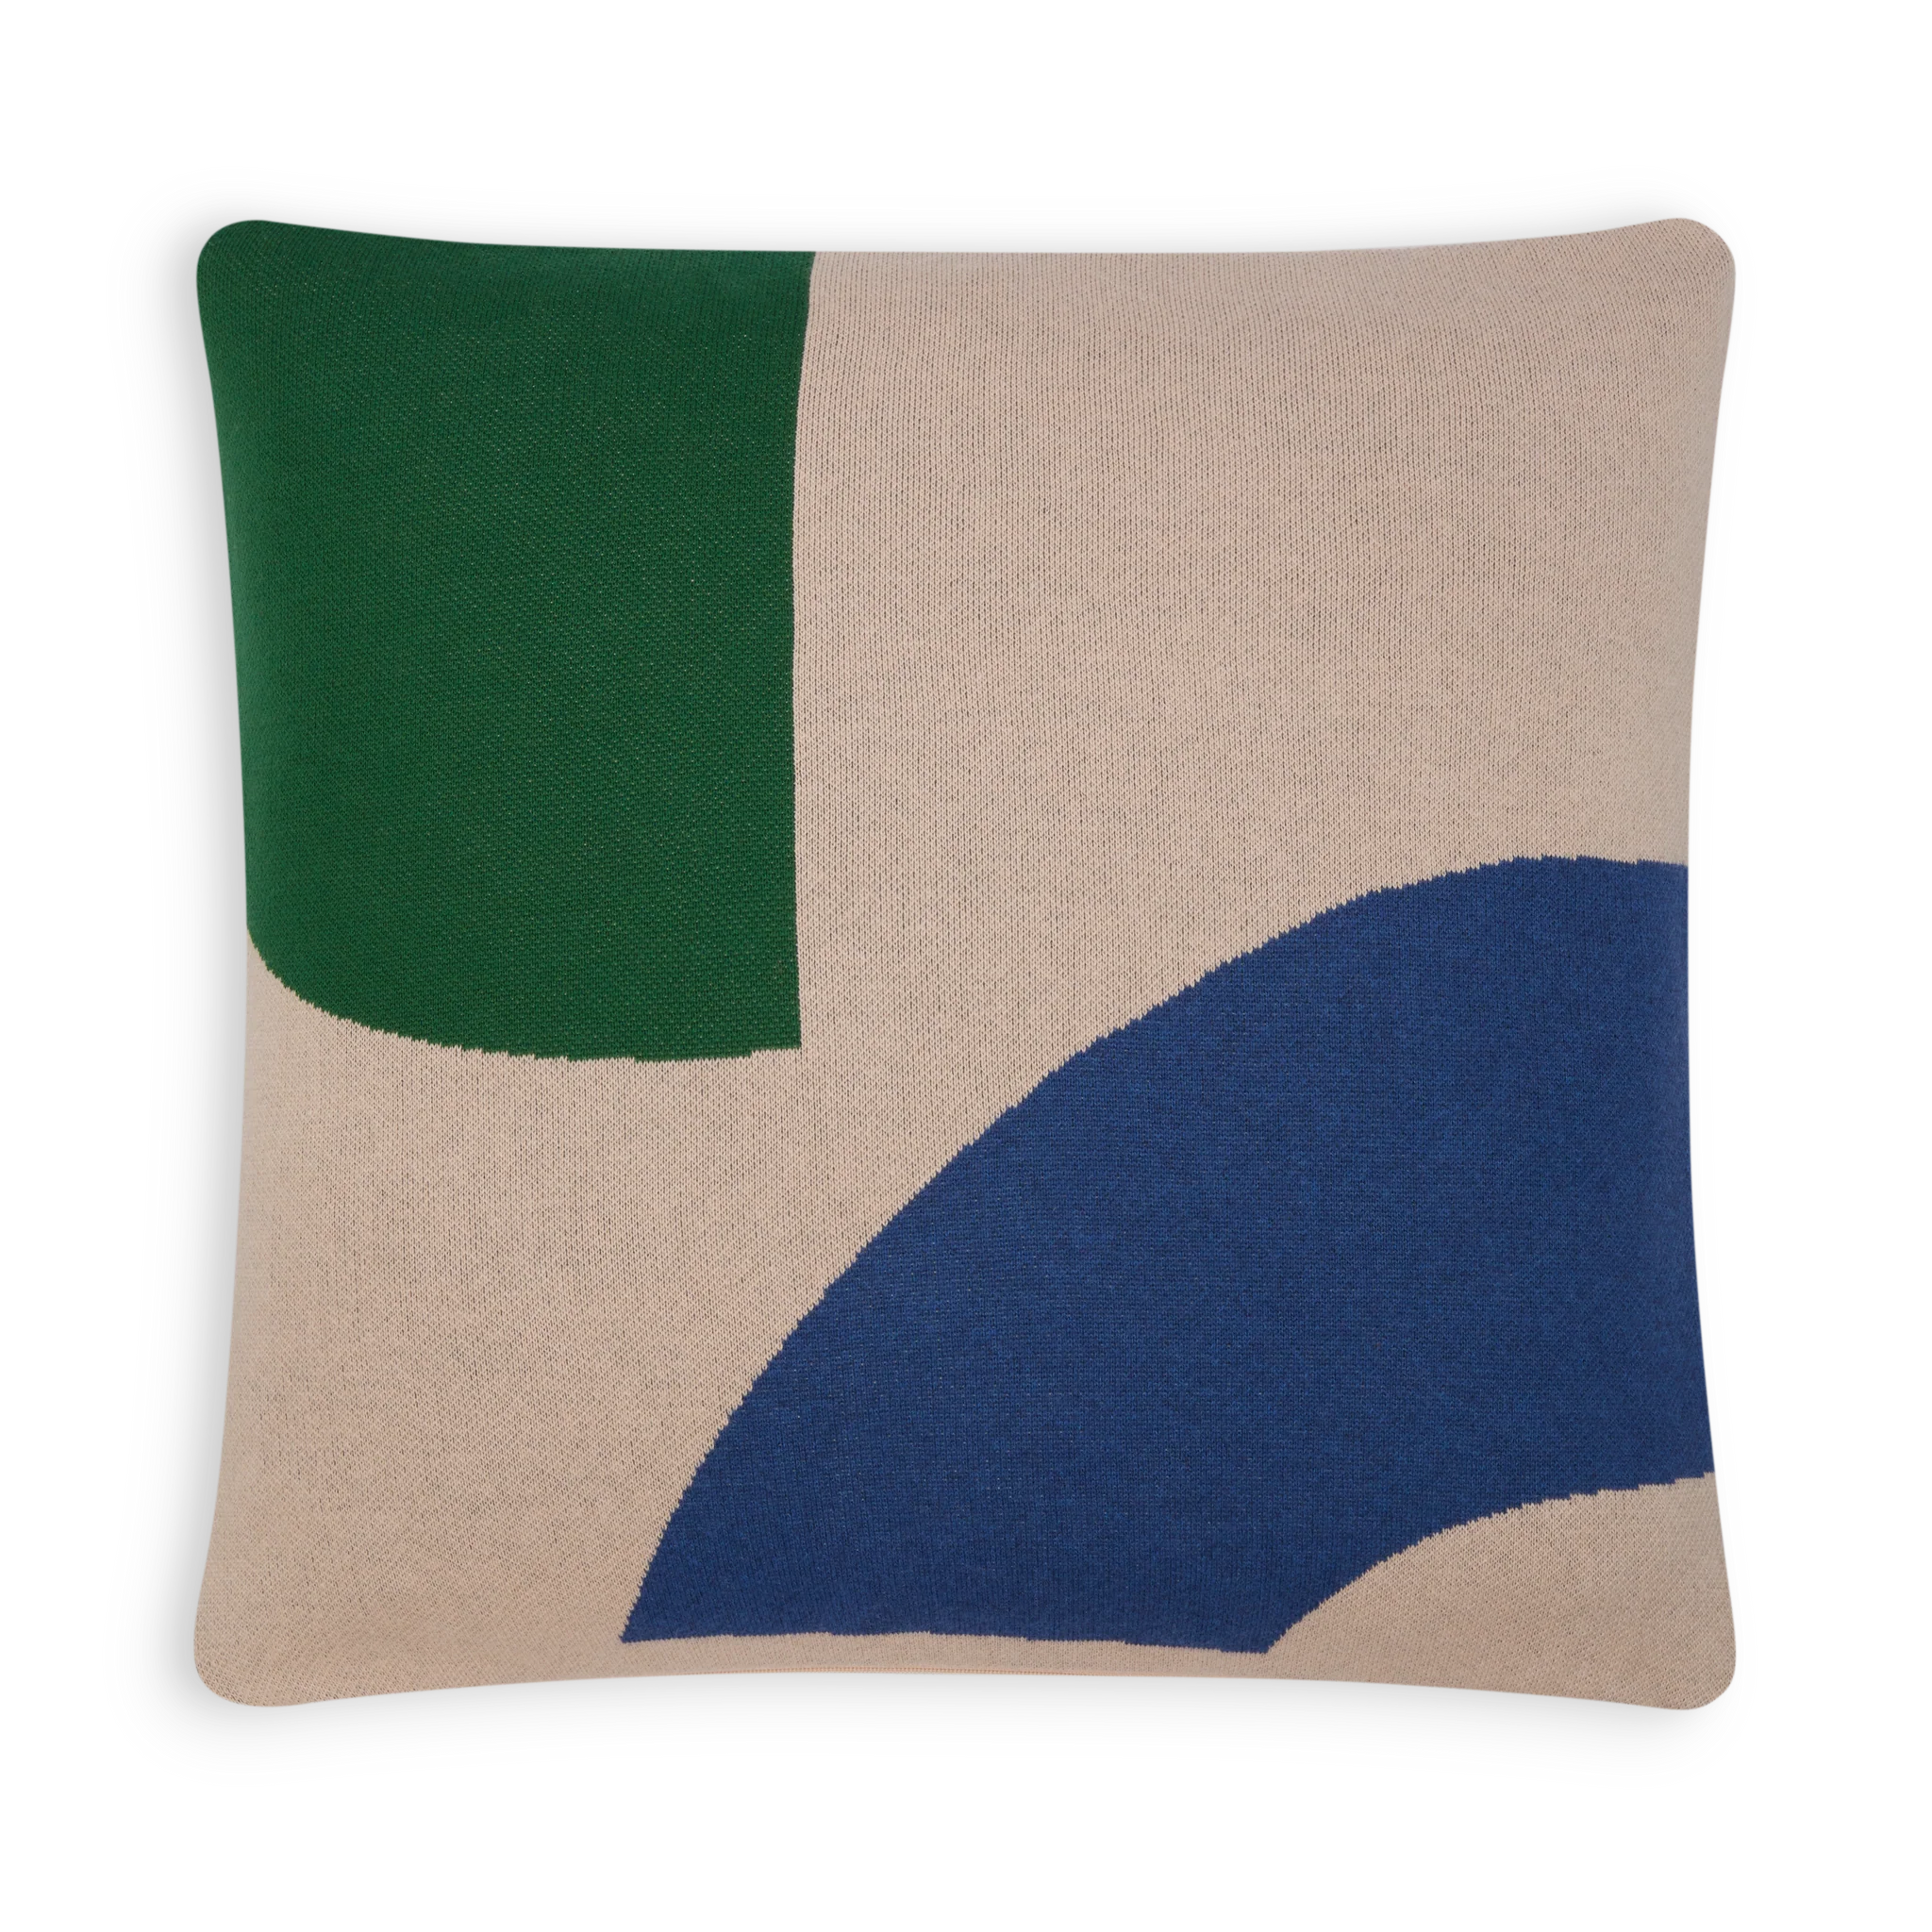 Sophie Home Ilo Cotton Knit Cushion Cover in Cobalt Blue and Green